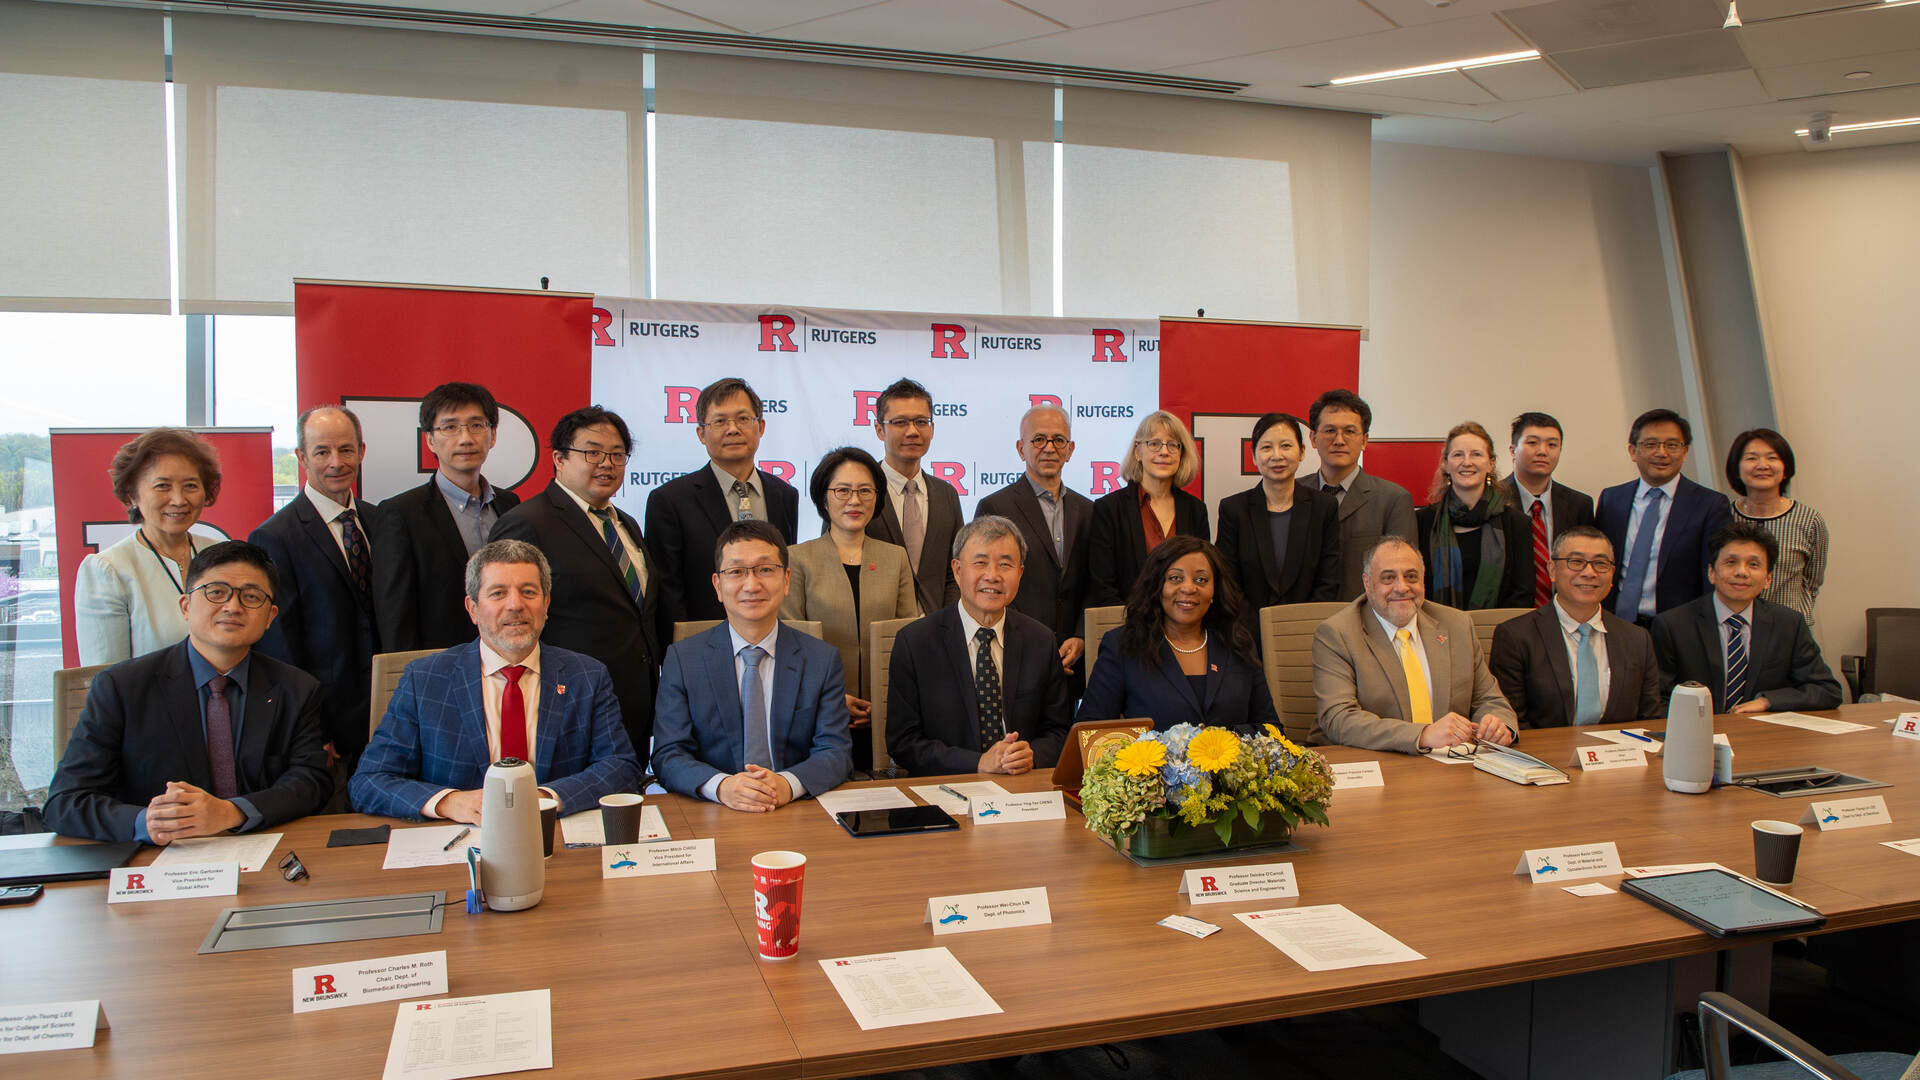 Chancellor of Rutgers University - New Brunswick, Francine Conway, signs MOU and 3+2 agreement with President Ying-Yao Cheng